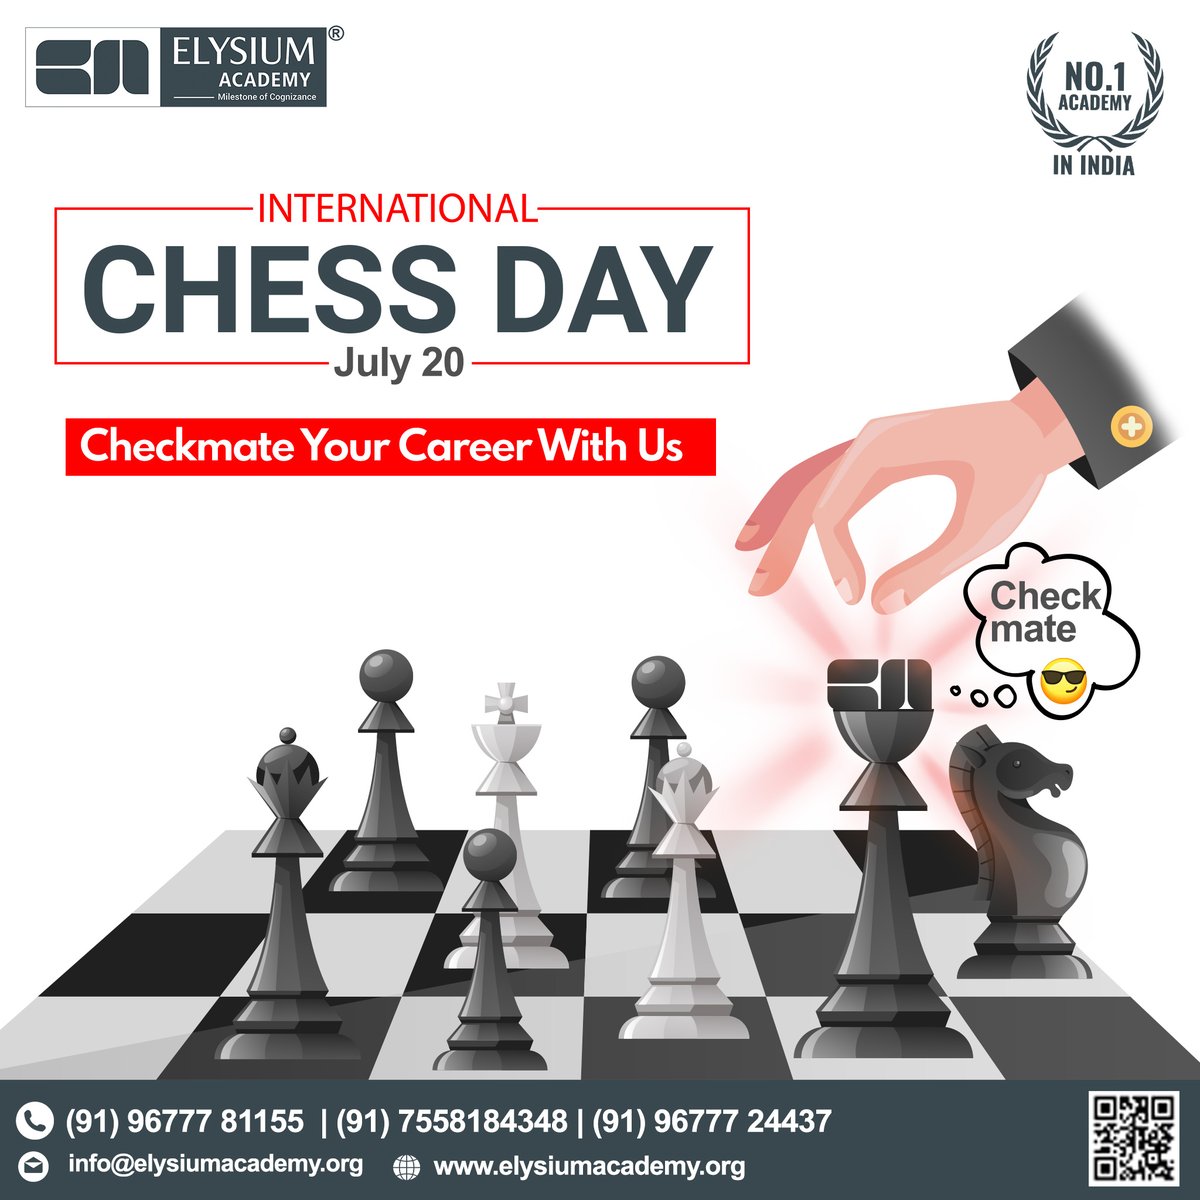 🎊Happy Chess Day to All Chess Lovers!👑 

Your moves be strategic, your tactics be sharp, and your victories be sweet! 

#ChessDay #ChessEnthusiasts #StrategyGame #Checkmate #GameOn #elysiumacademy #no1academy #ittraining #jobassurane #tesbocourse